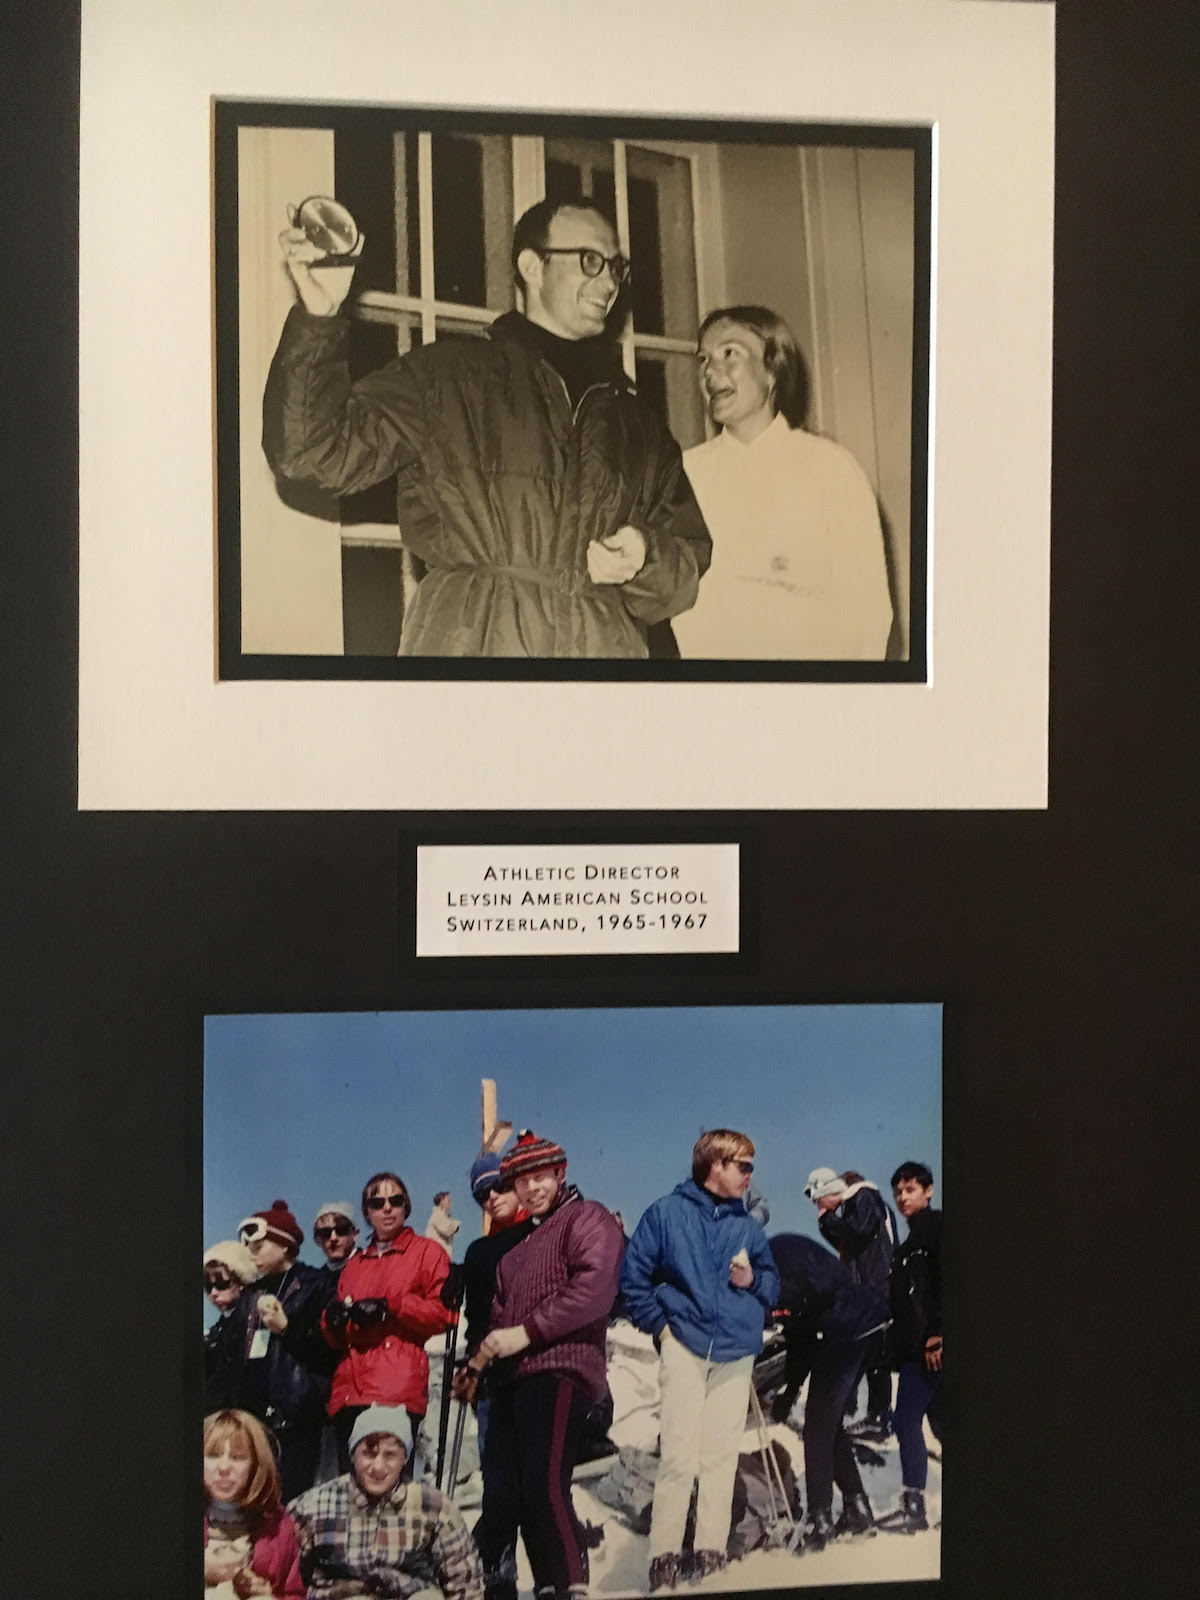 Photos on display at the memorial included these images from Royal and Liz Robbins' time at the Leysin American School in Switzerland where Royal served as the athletic director from 1965 to 1967. [Photo] Derek Franz